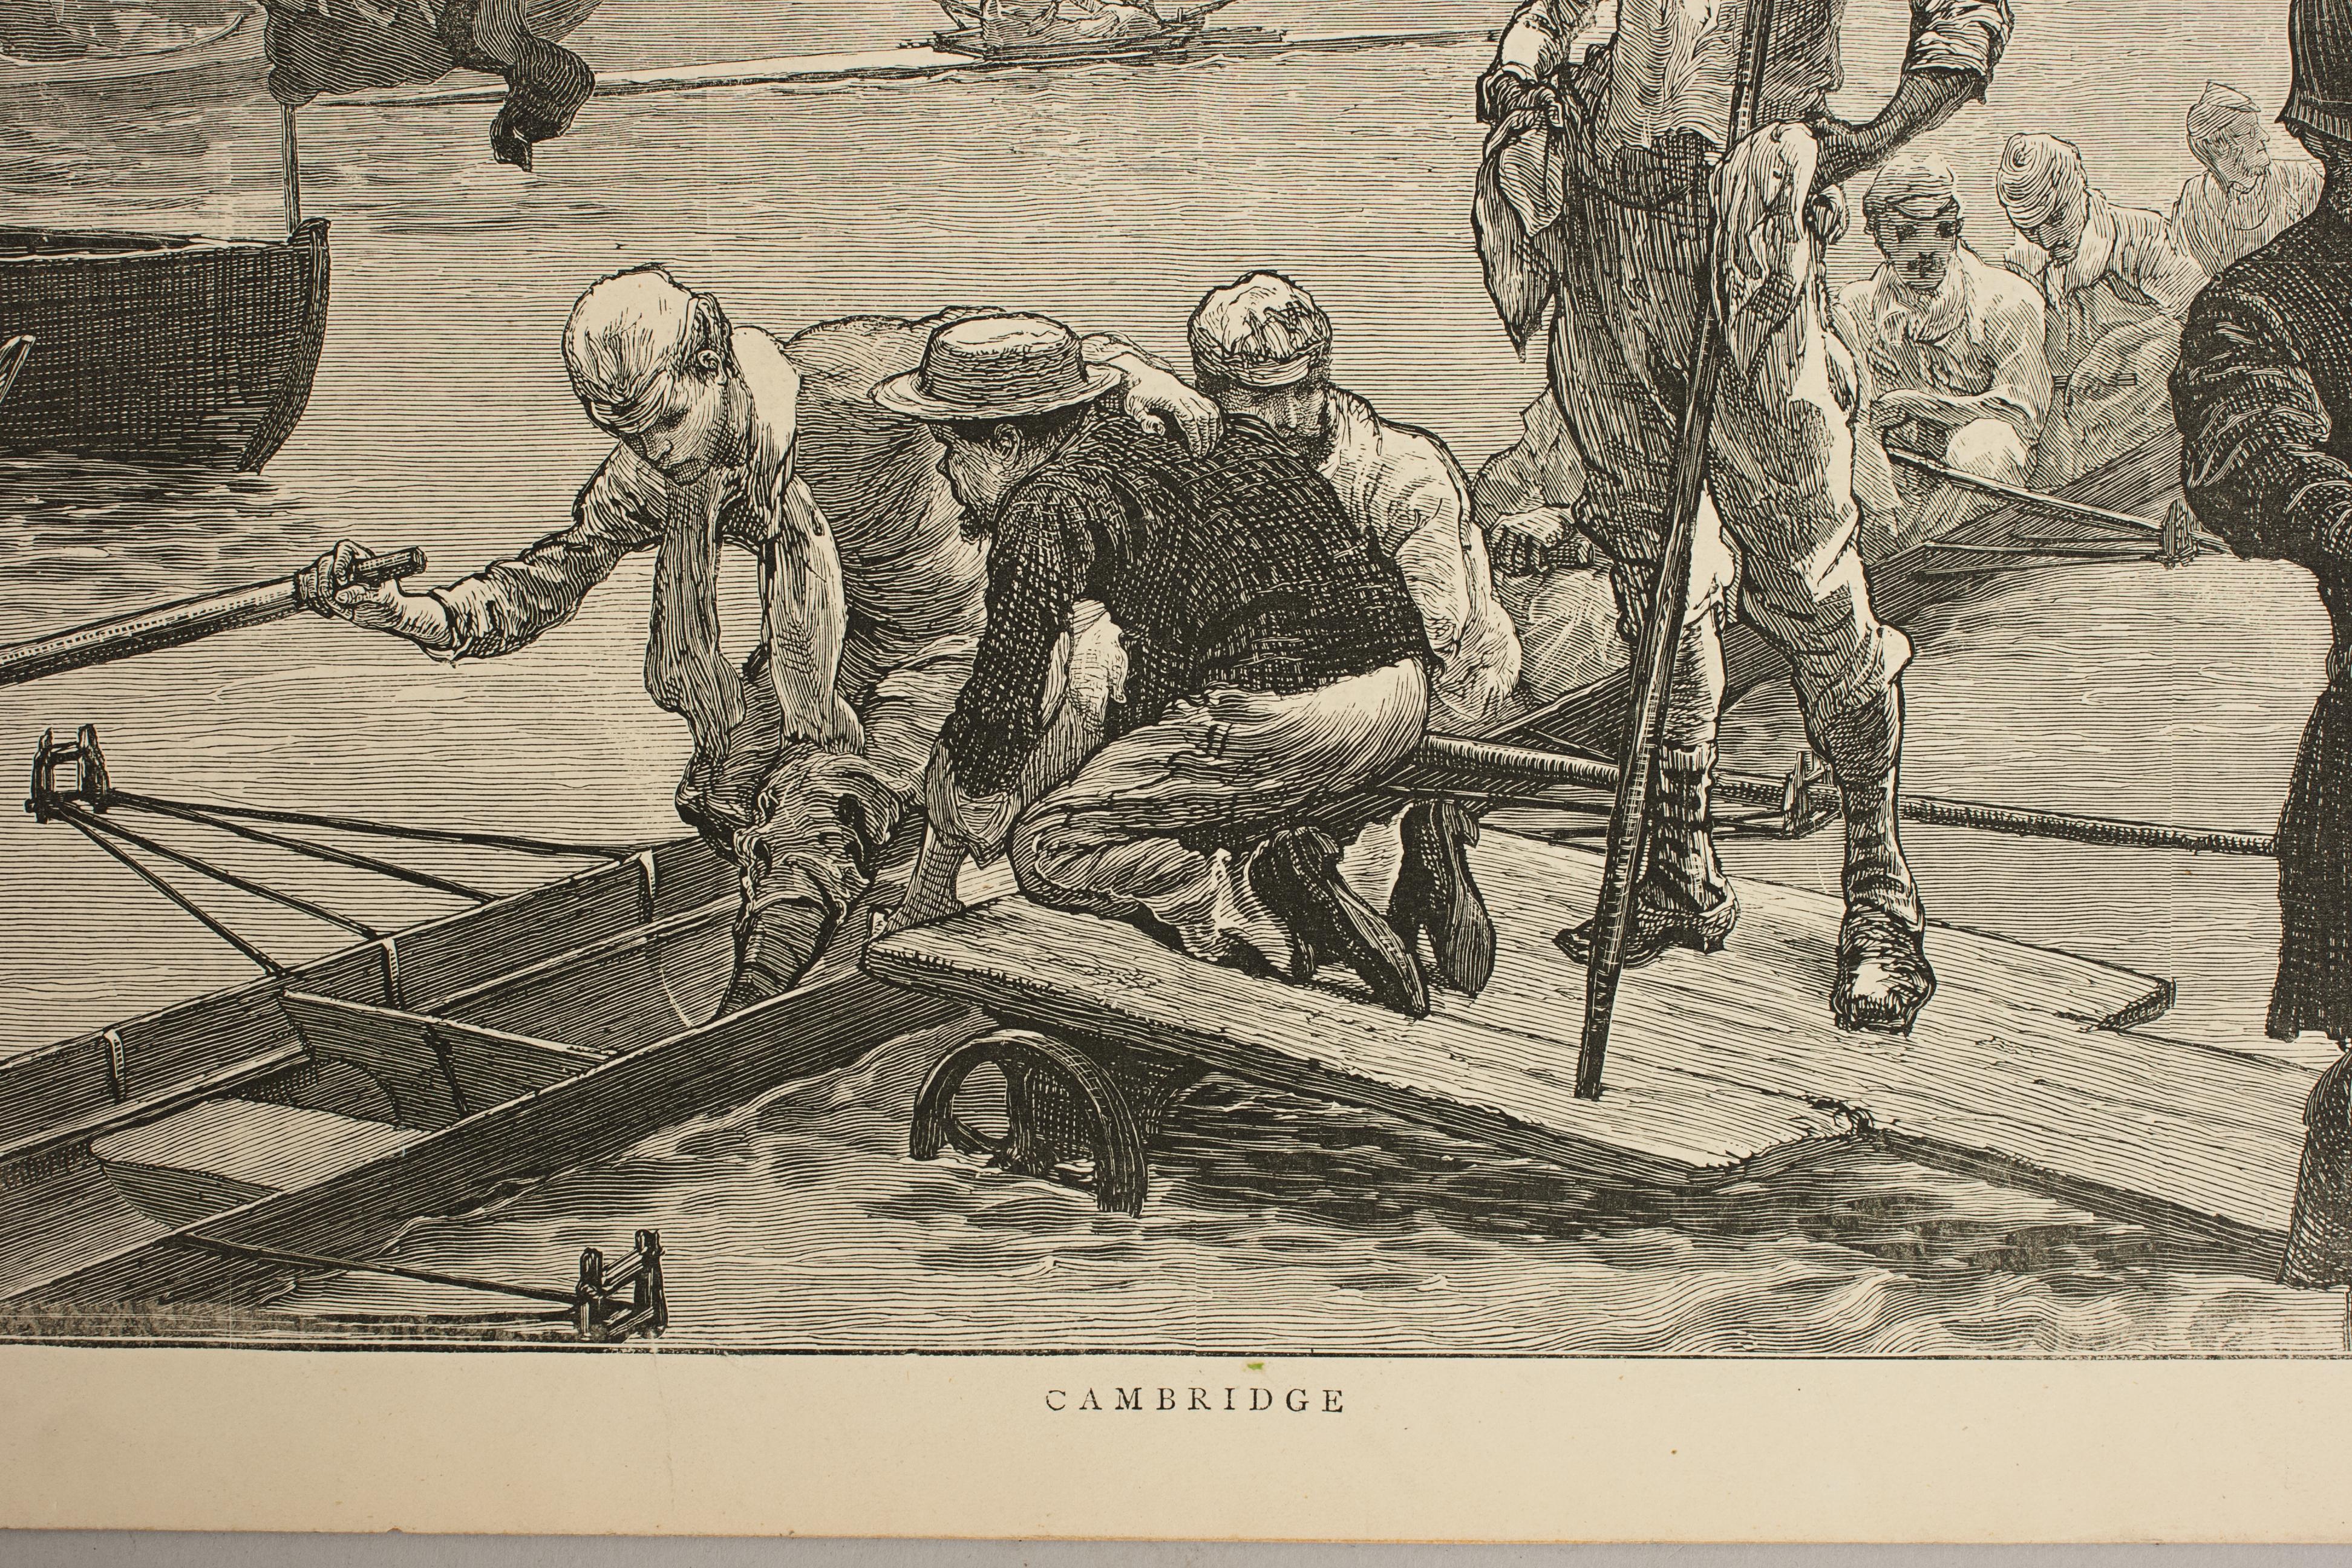 Cambridge preparing for the boat race.
A wonderful atmospheric rowing lithograph of the Cambridge crew getting into a rowing scull preparing for a race. Five crew members are already seated, the six is climbing into the rowing scull and a seventh